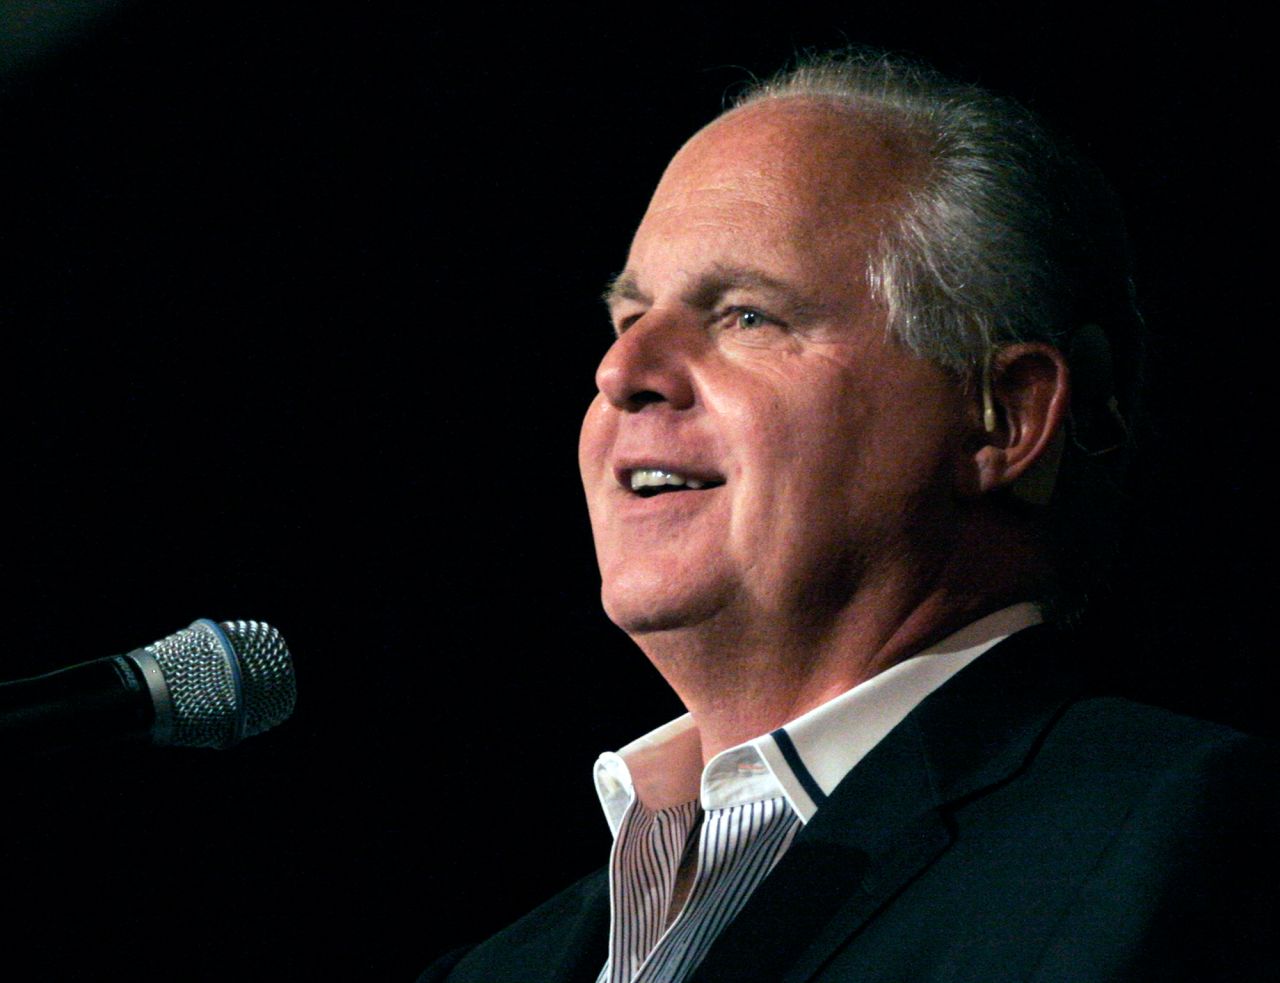 <a href="https://www.cnn.com/2021/02/17/media/rush-limbaugh-obituary/index.html" target="_blank">Rush Limbaugh,</a> the conservative media icon who for decades used his perch as the king of talk radio to shape the politics of both the Republican Party and nation, died February 17 after a battle with cancer. He was 70.